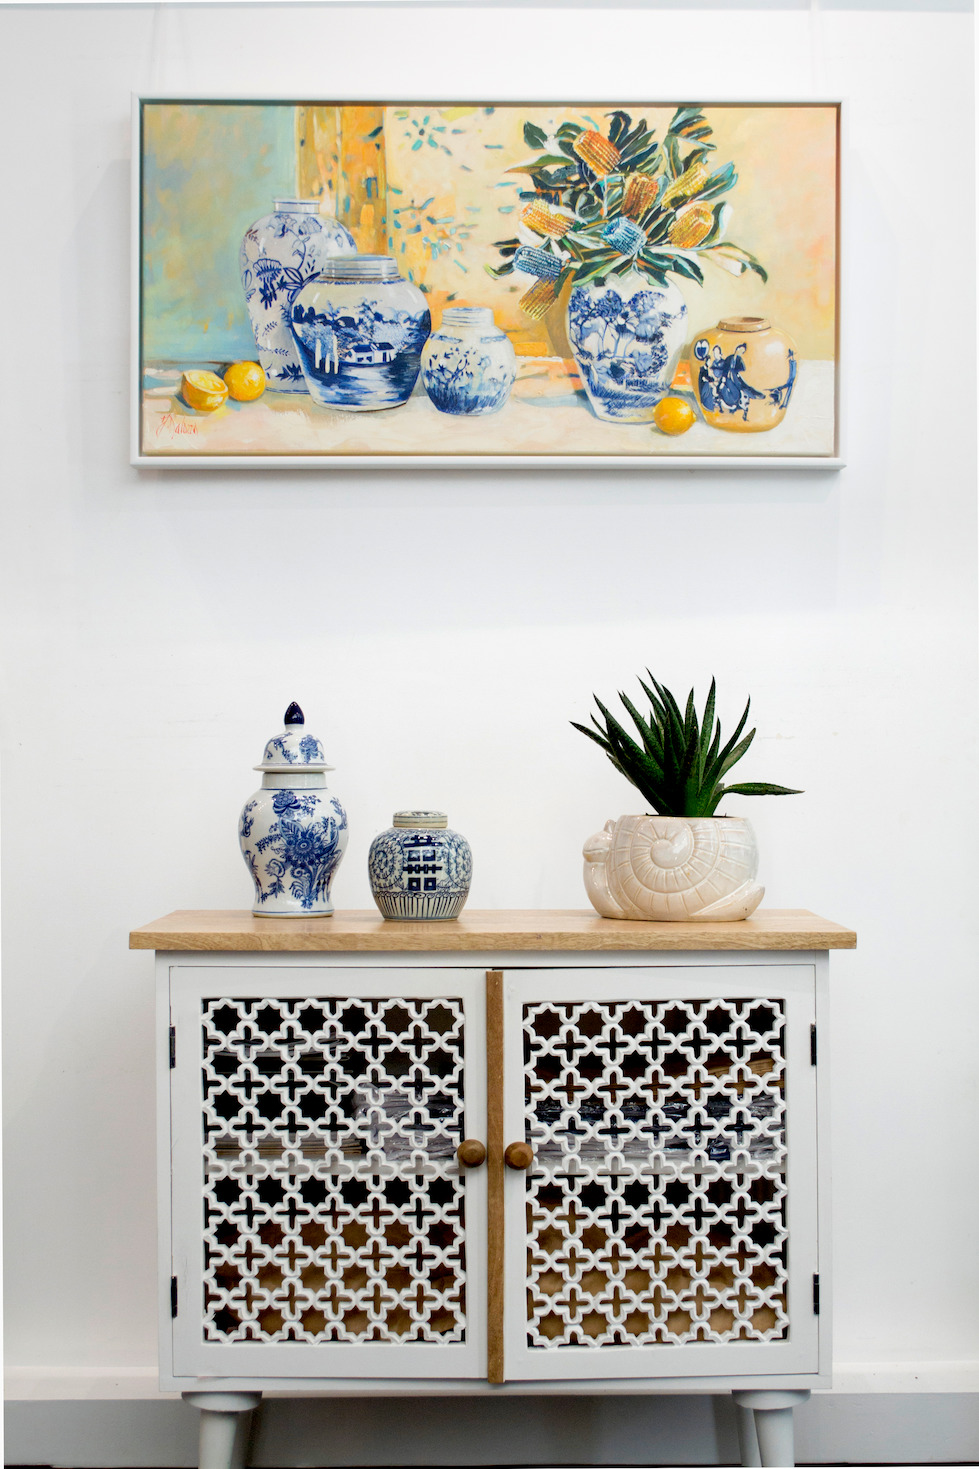 Wall Design Ideas 2 With Still Life Painting "Banksia with China Vases" By Judith Dalozzo